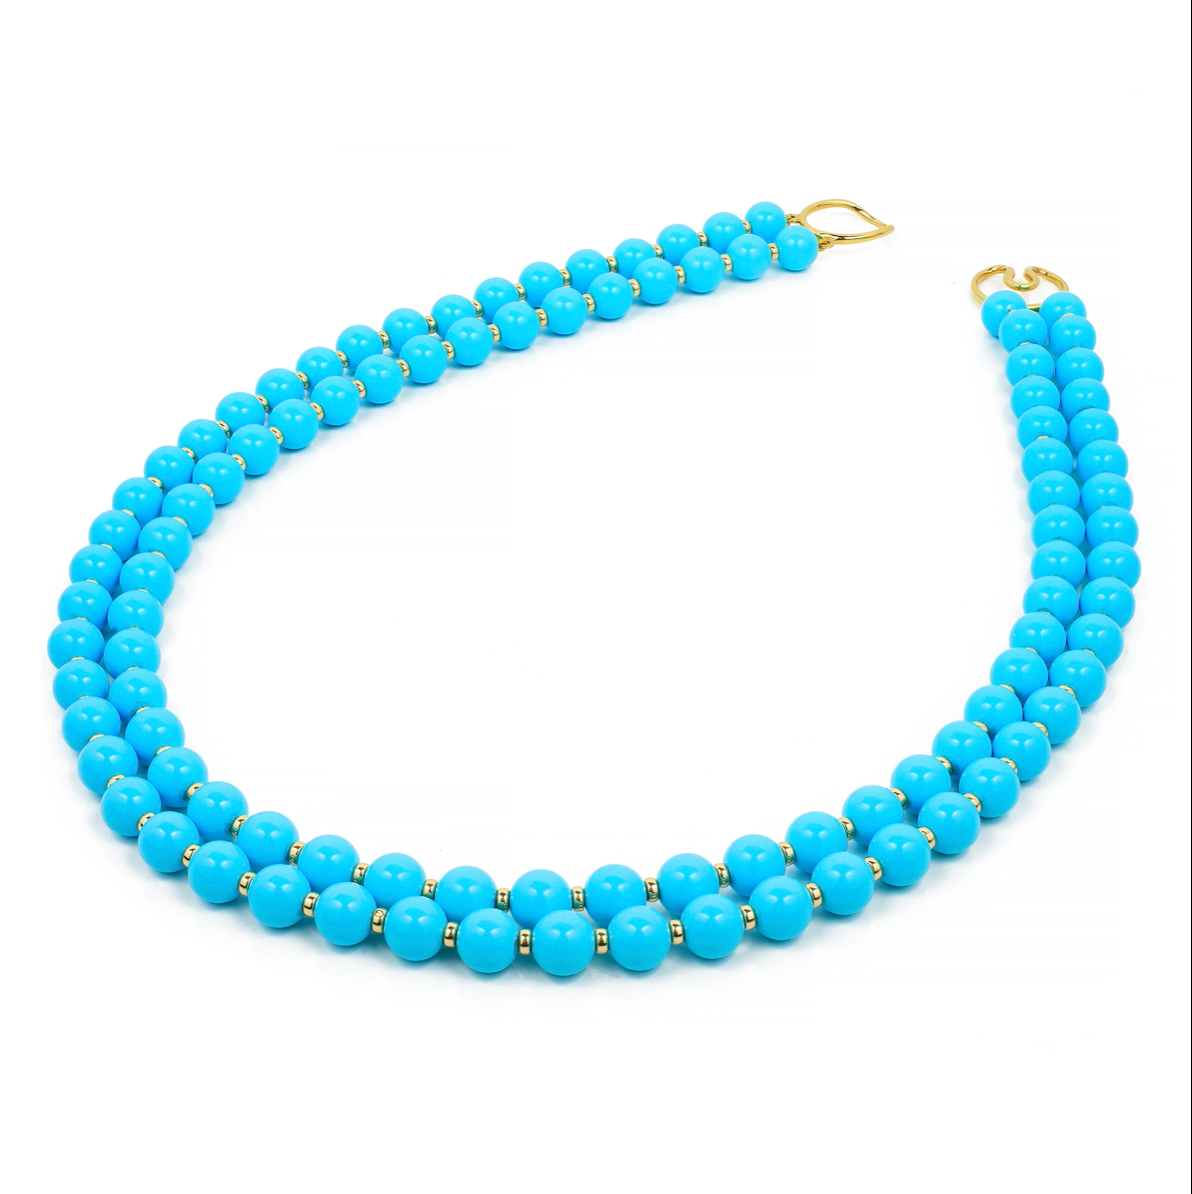 Turquoise 8mm Round Beads Necklace